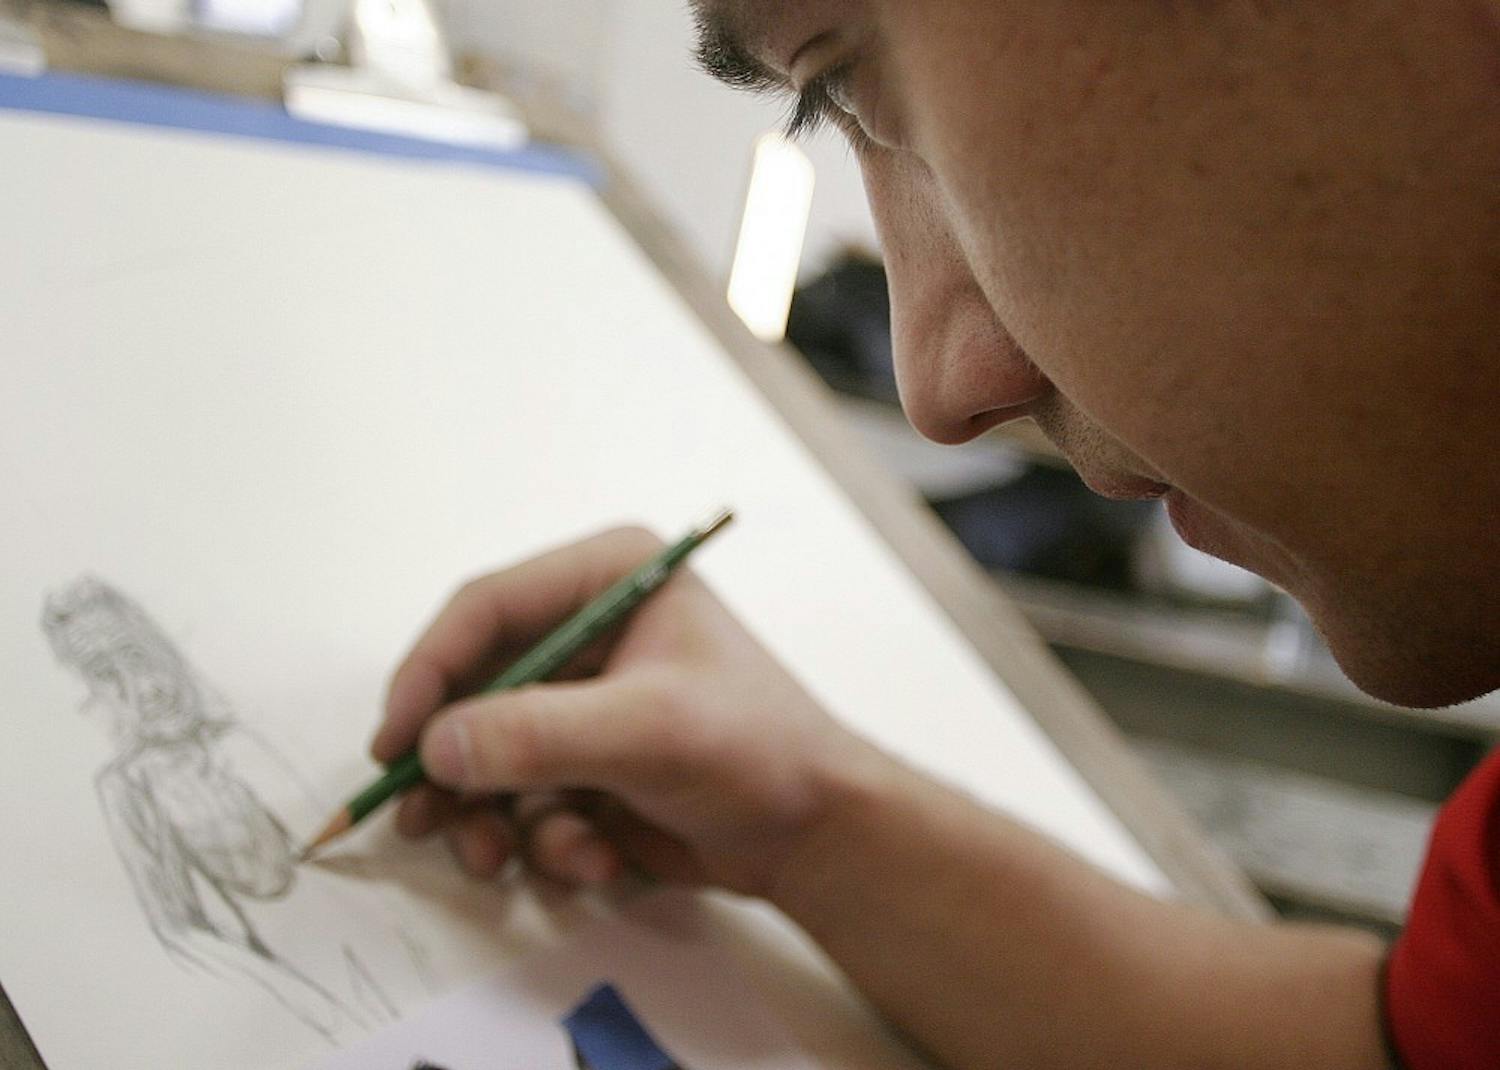 	Student Mario Villagomez works on his drawing project in the Art Building on Monday. The Art Building studios are open from 7 a.m. to 11 p.m. every day, but security only began enforcing the closing policy a week ago. Some art students say the building should stay open so they can work later.